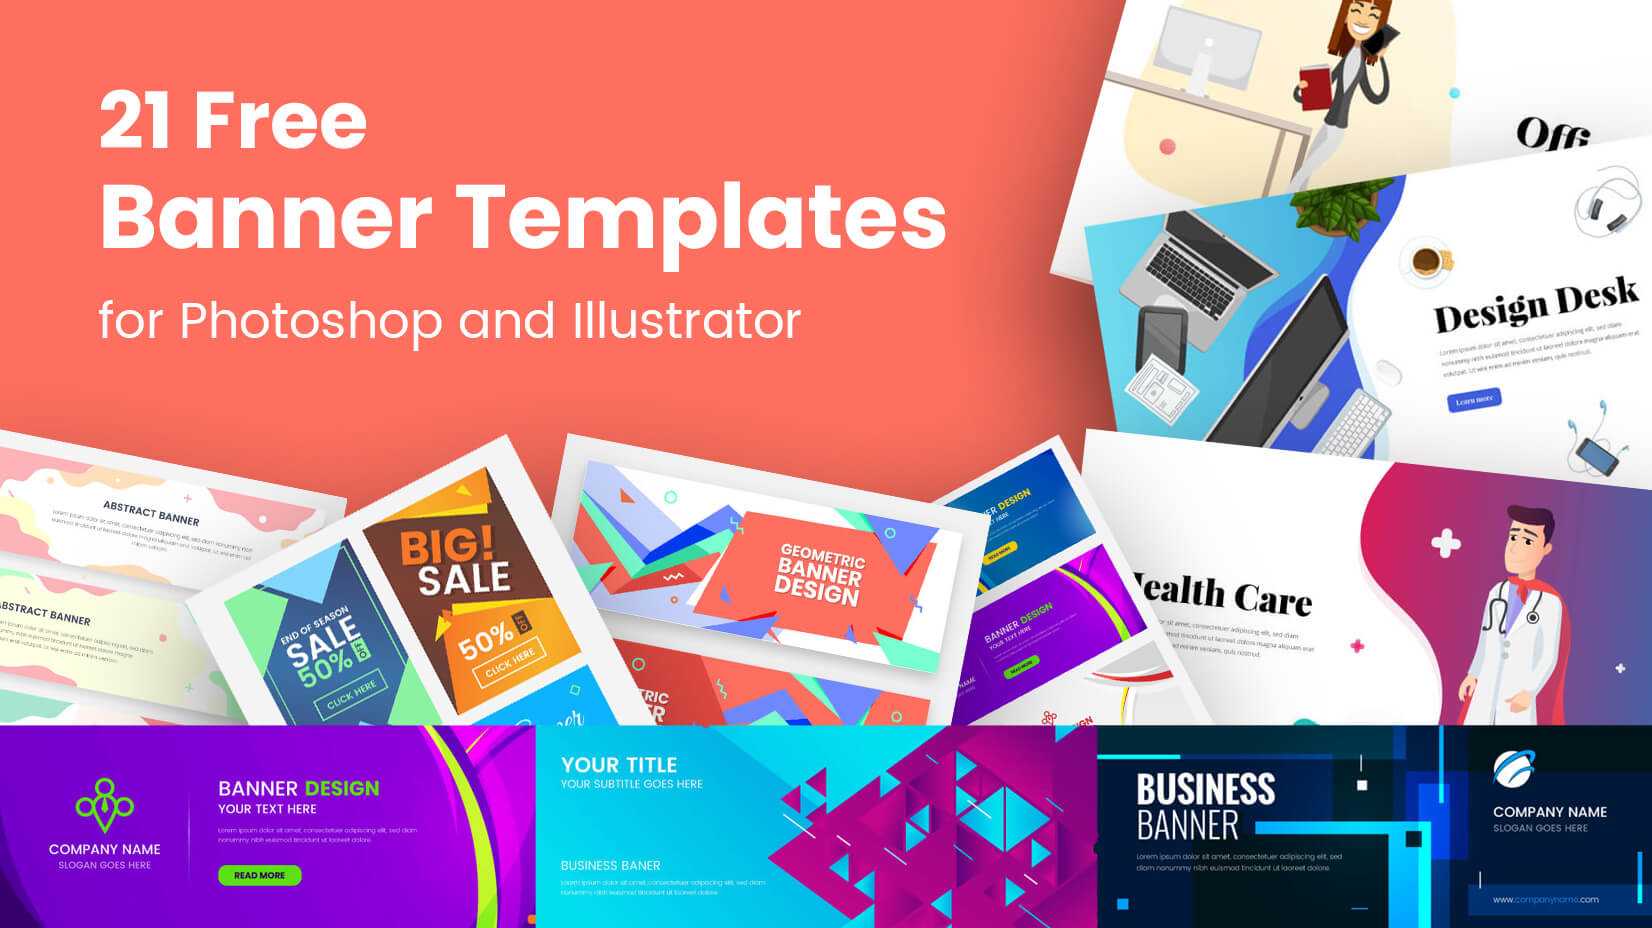 21 Free Banner Templates For Photoshop And Illustrator For Banner Template For Photoshop